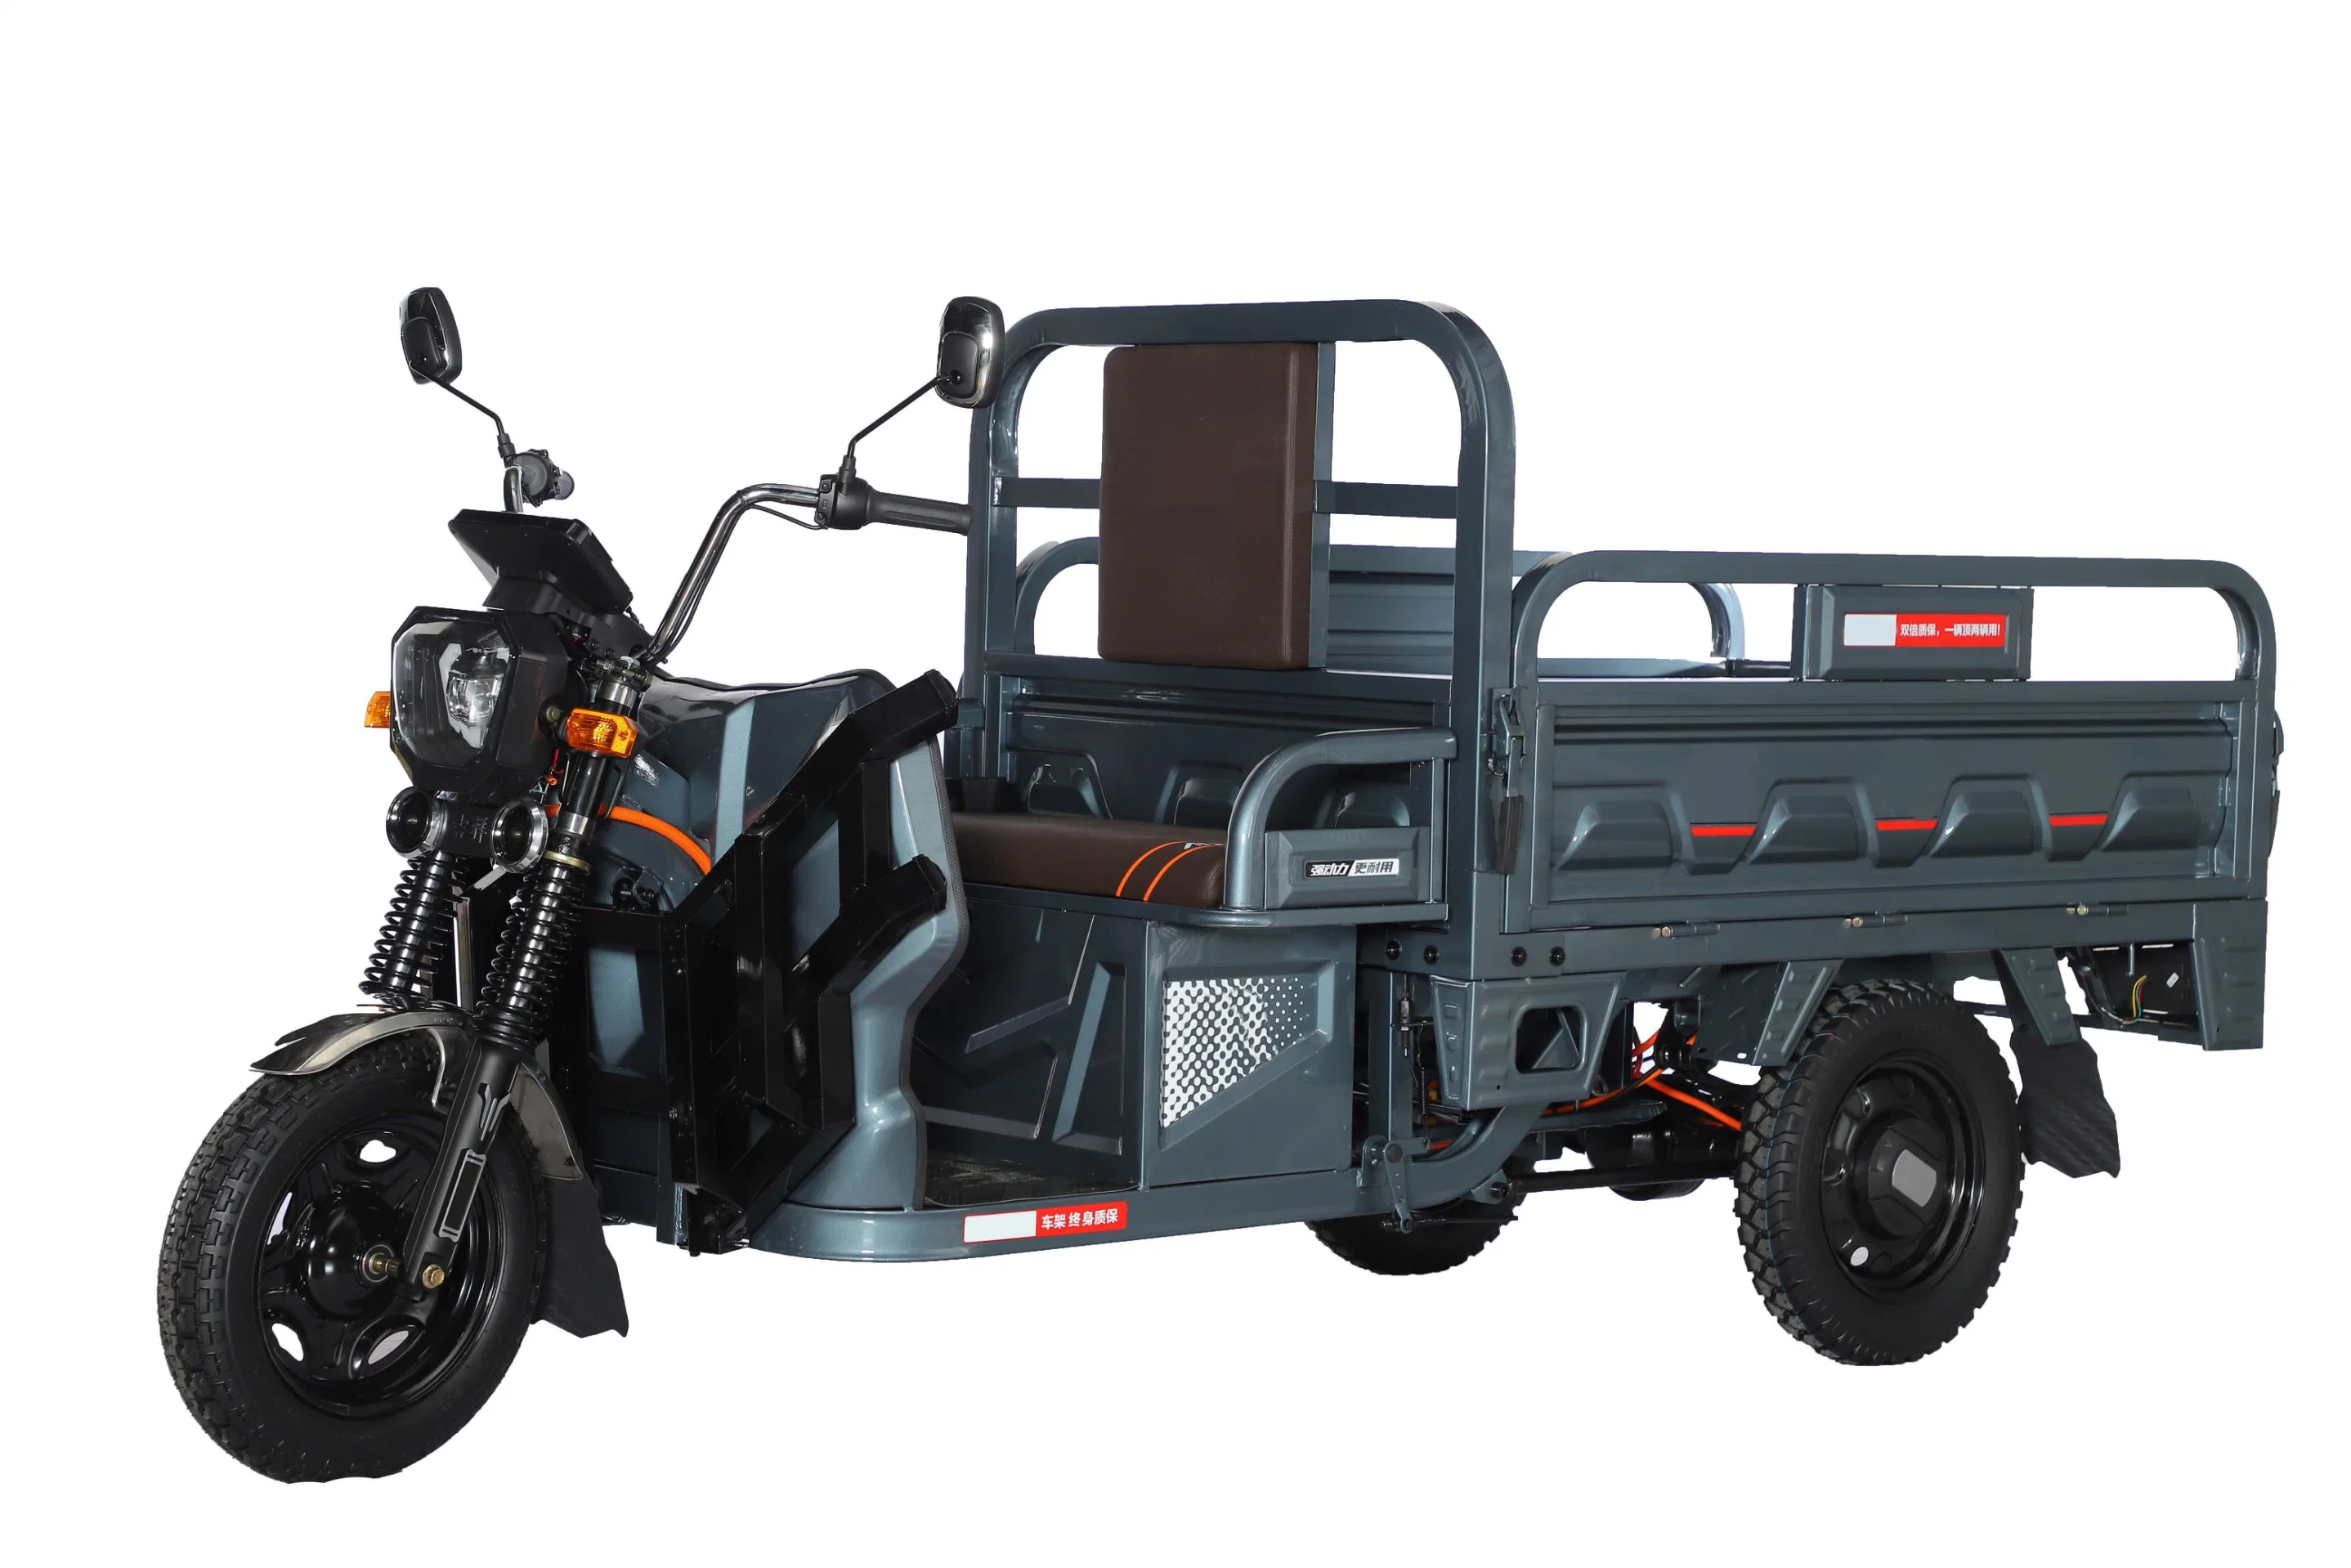 48V/60V 800W 40h Heavy Duty Three Wheel Electric Cargo Dumping Tricycle Motorcycle for Agricultural Construction